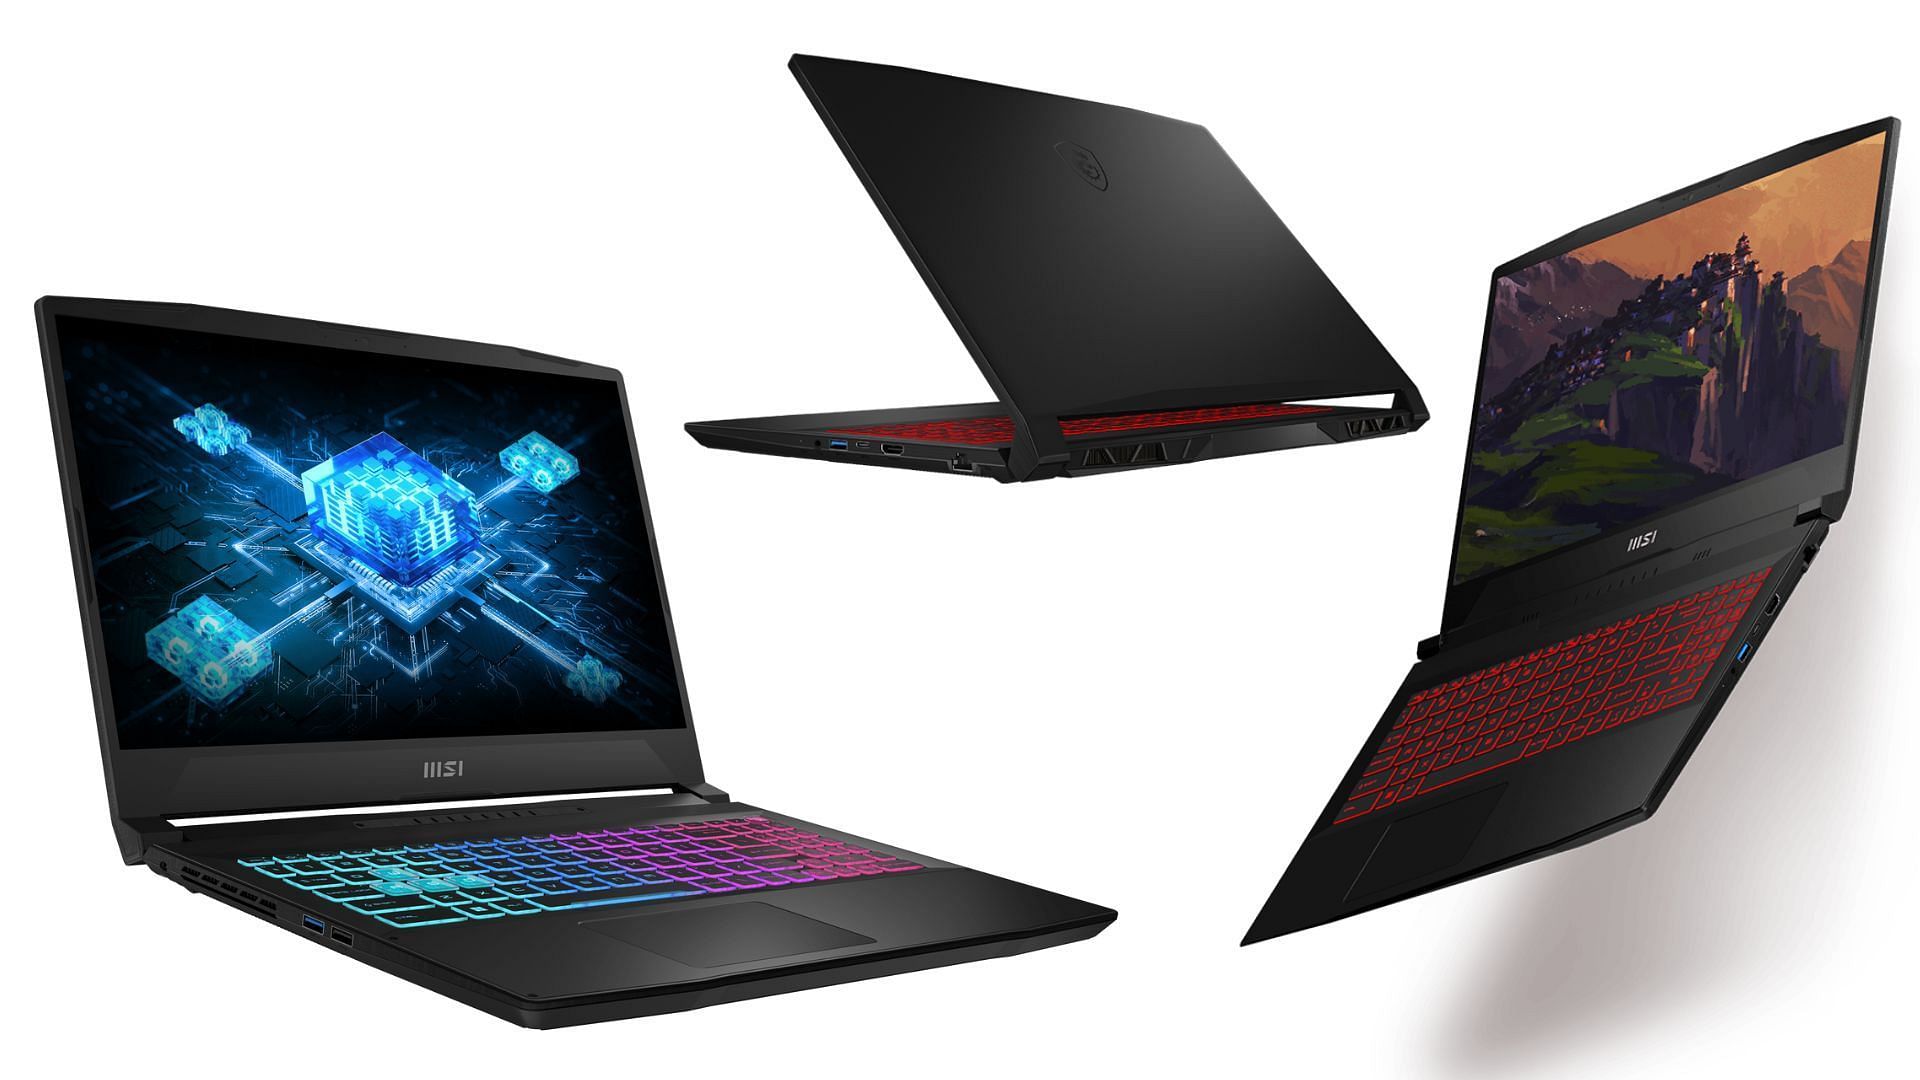 The Katana offers slightly better performance compared to the Victus (Image via MSI)